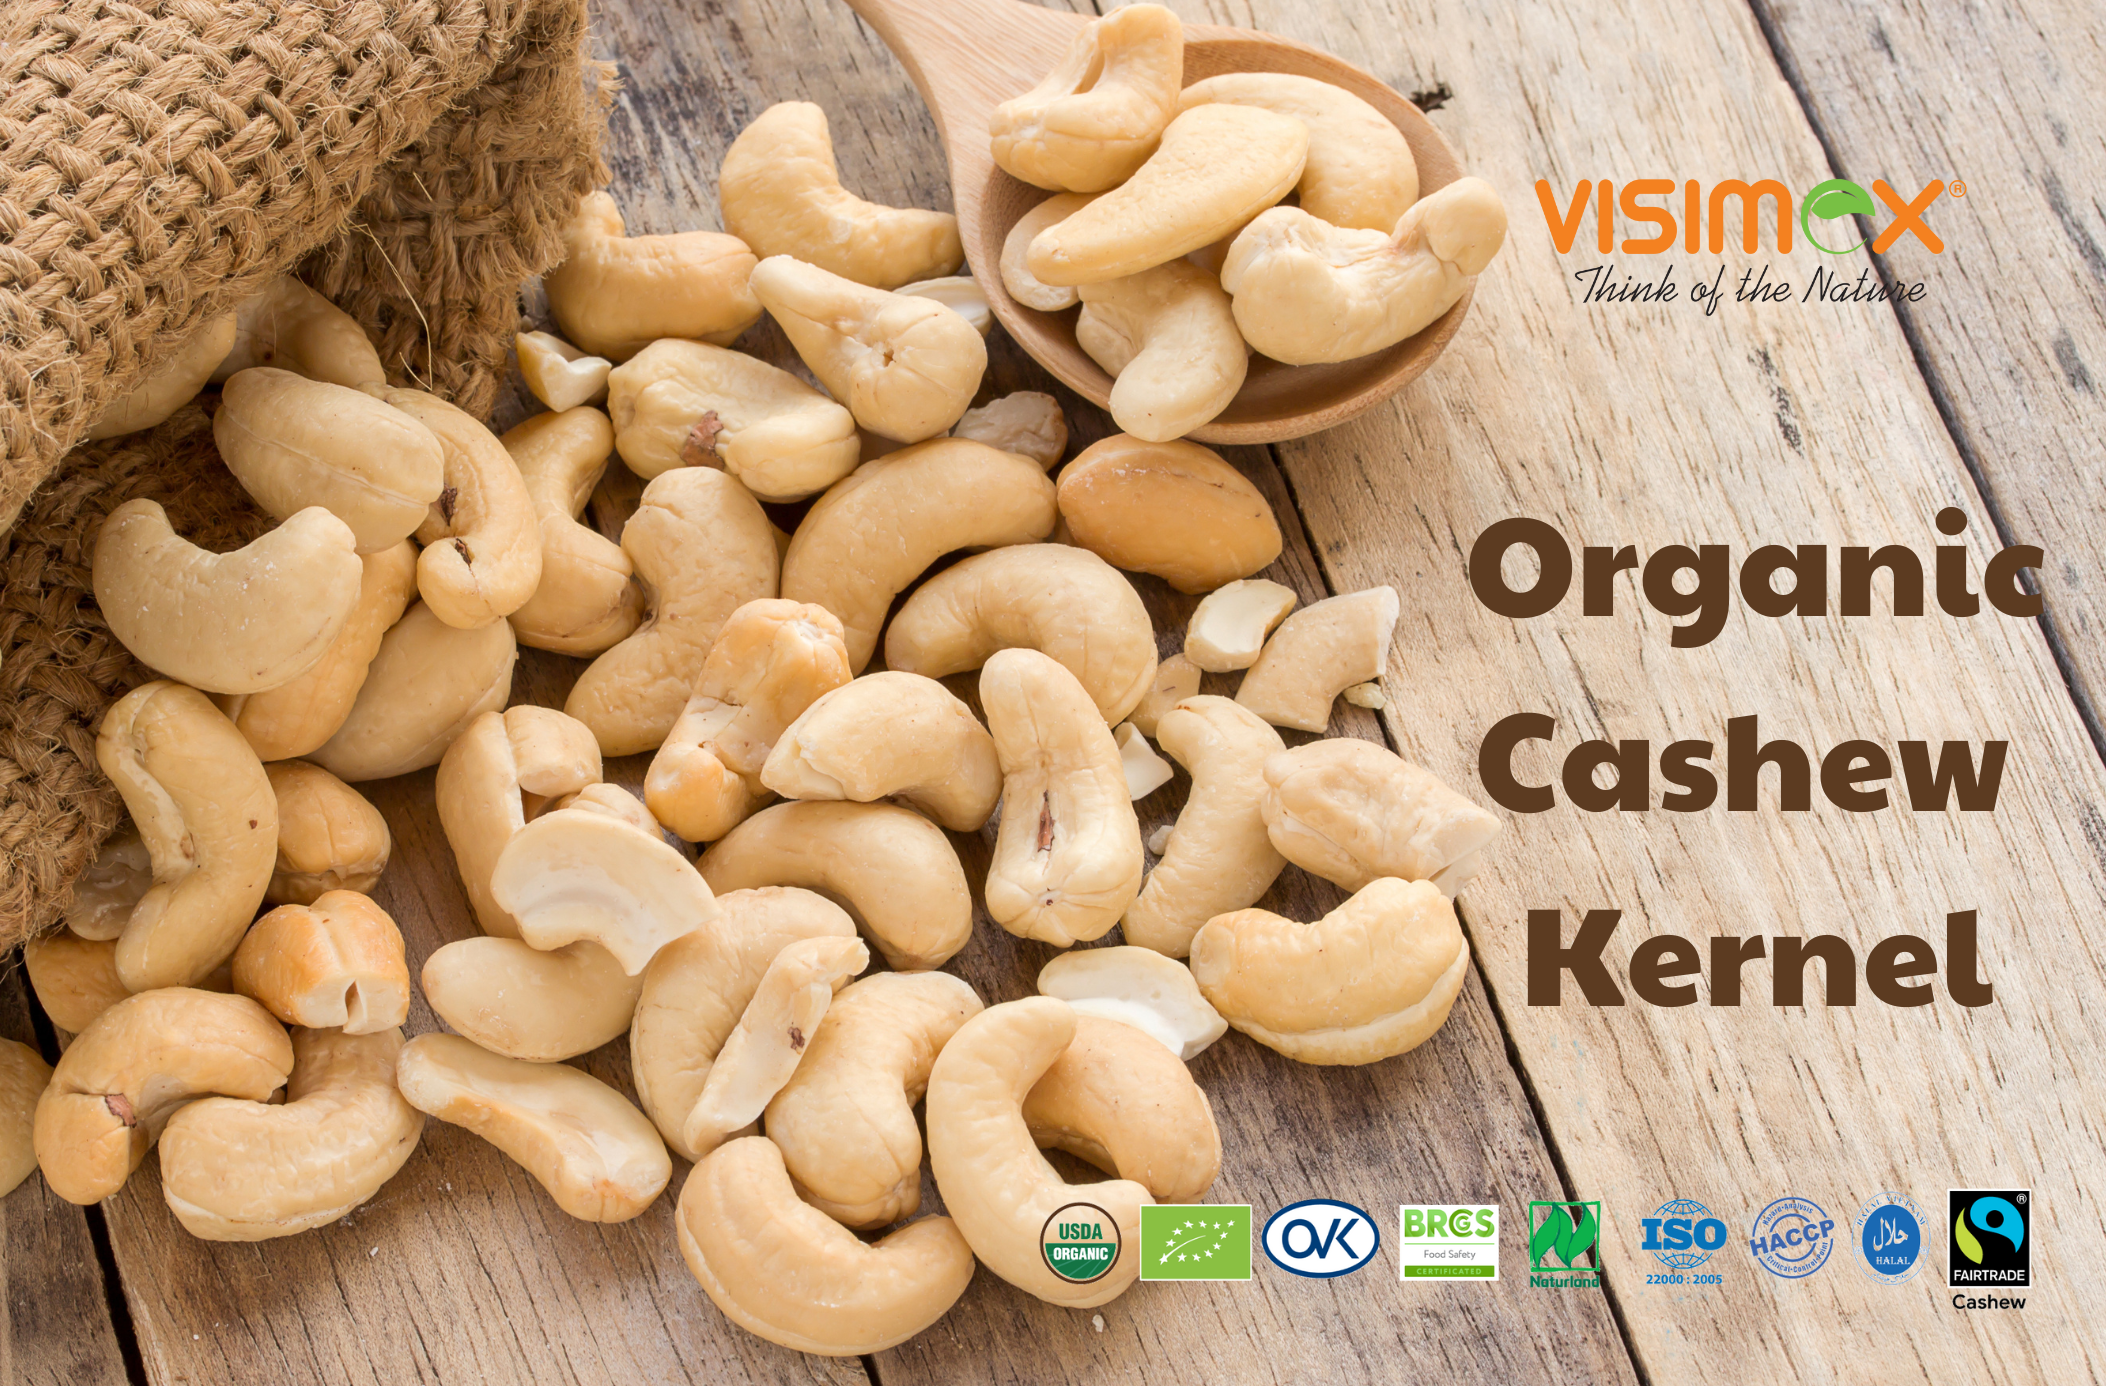 Learn about the growing demand for organic cashew nuts in international markets and the factors driving this trend.